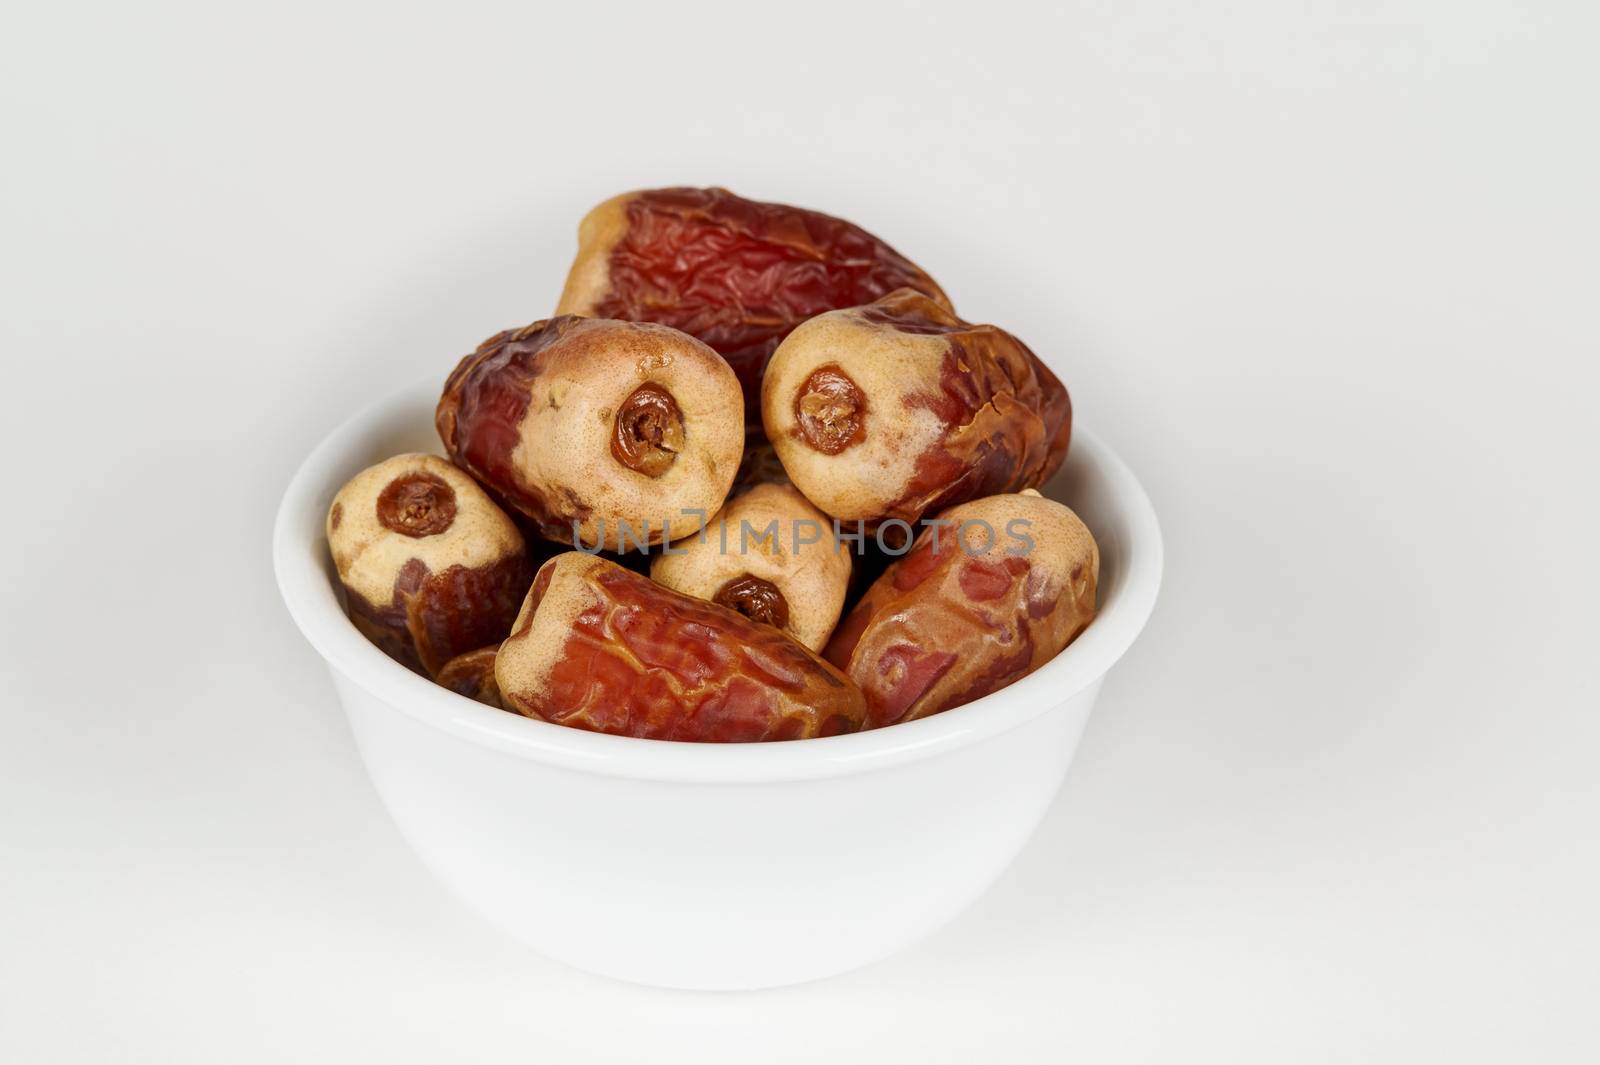 Closeup view of a bowl of Sagai dates on a white background